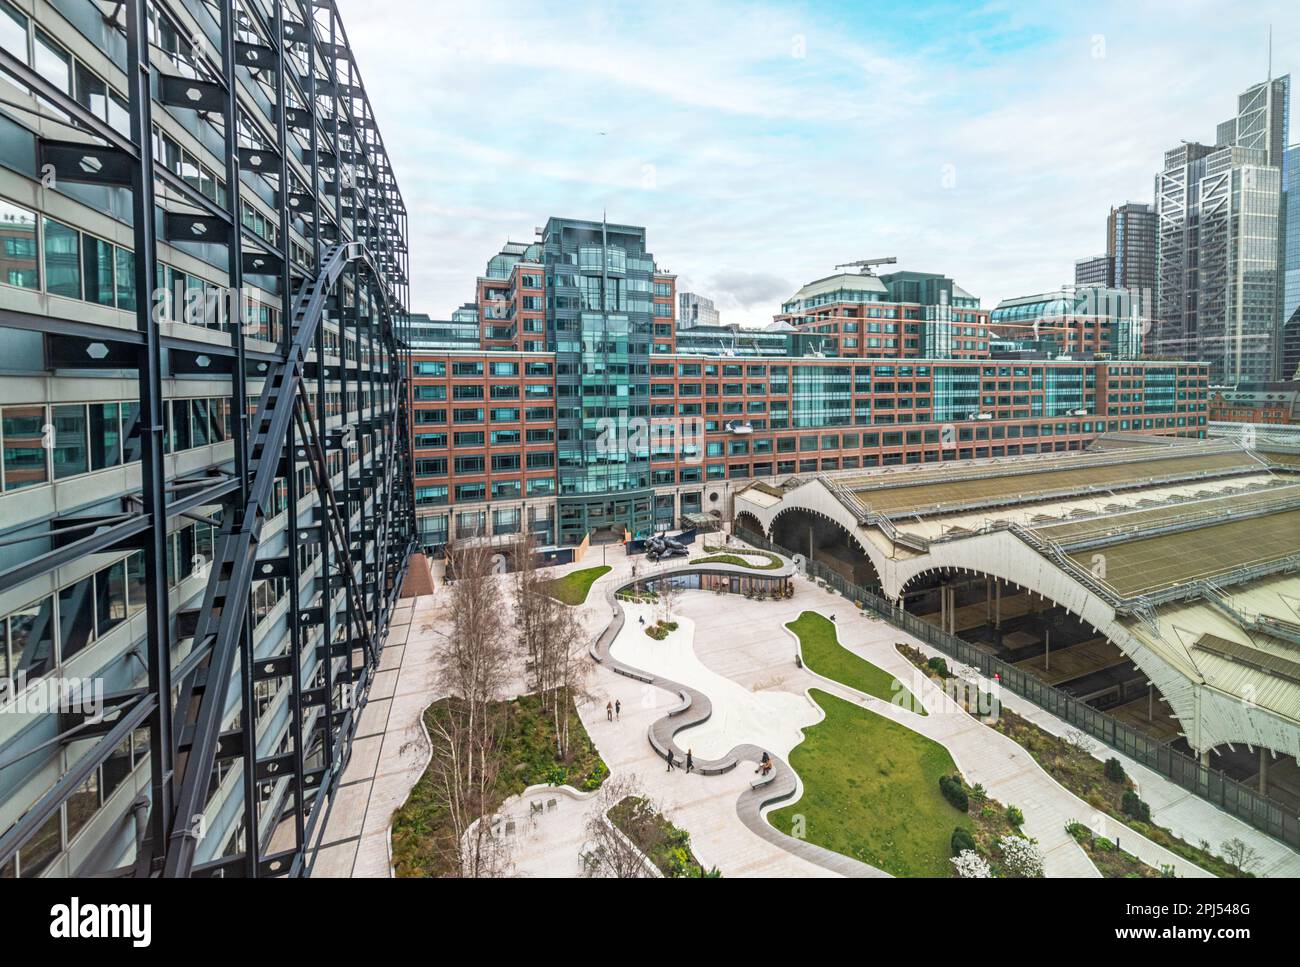 Broadgate Exchange Square and Liverpool St Station seen from above, London, EC2. Stock Photo